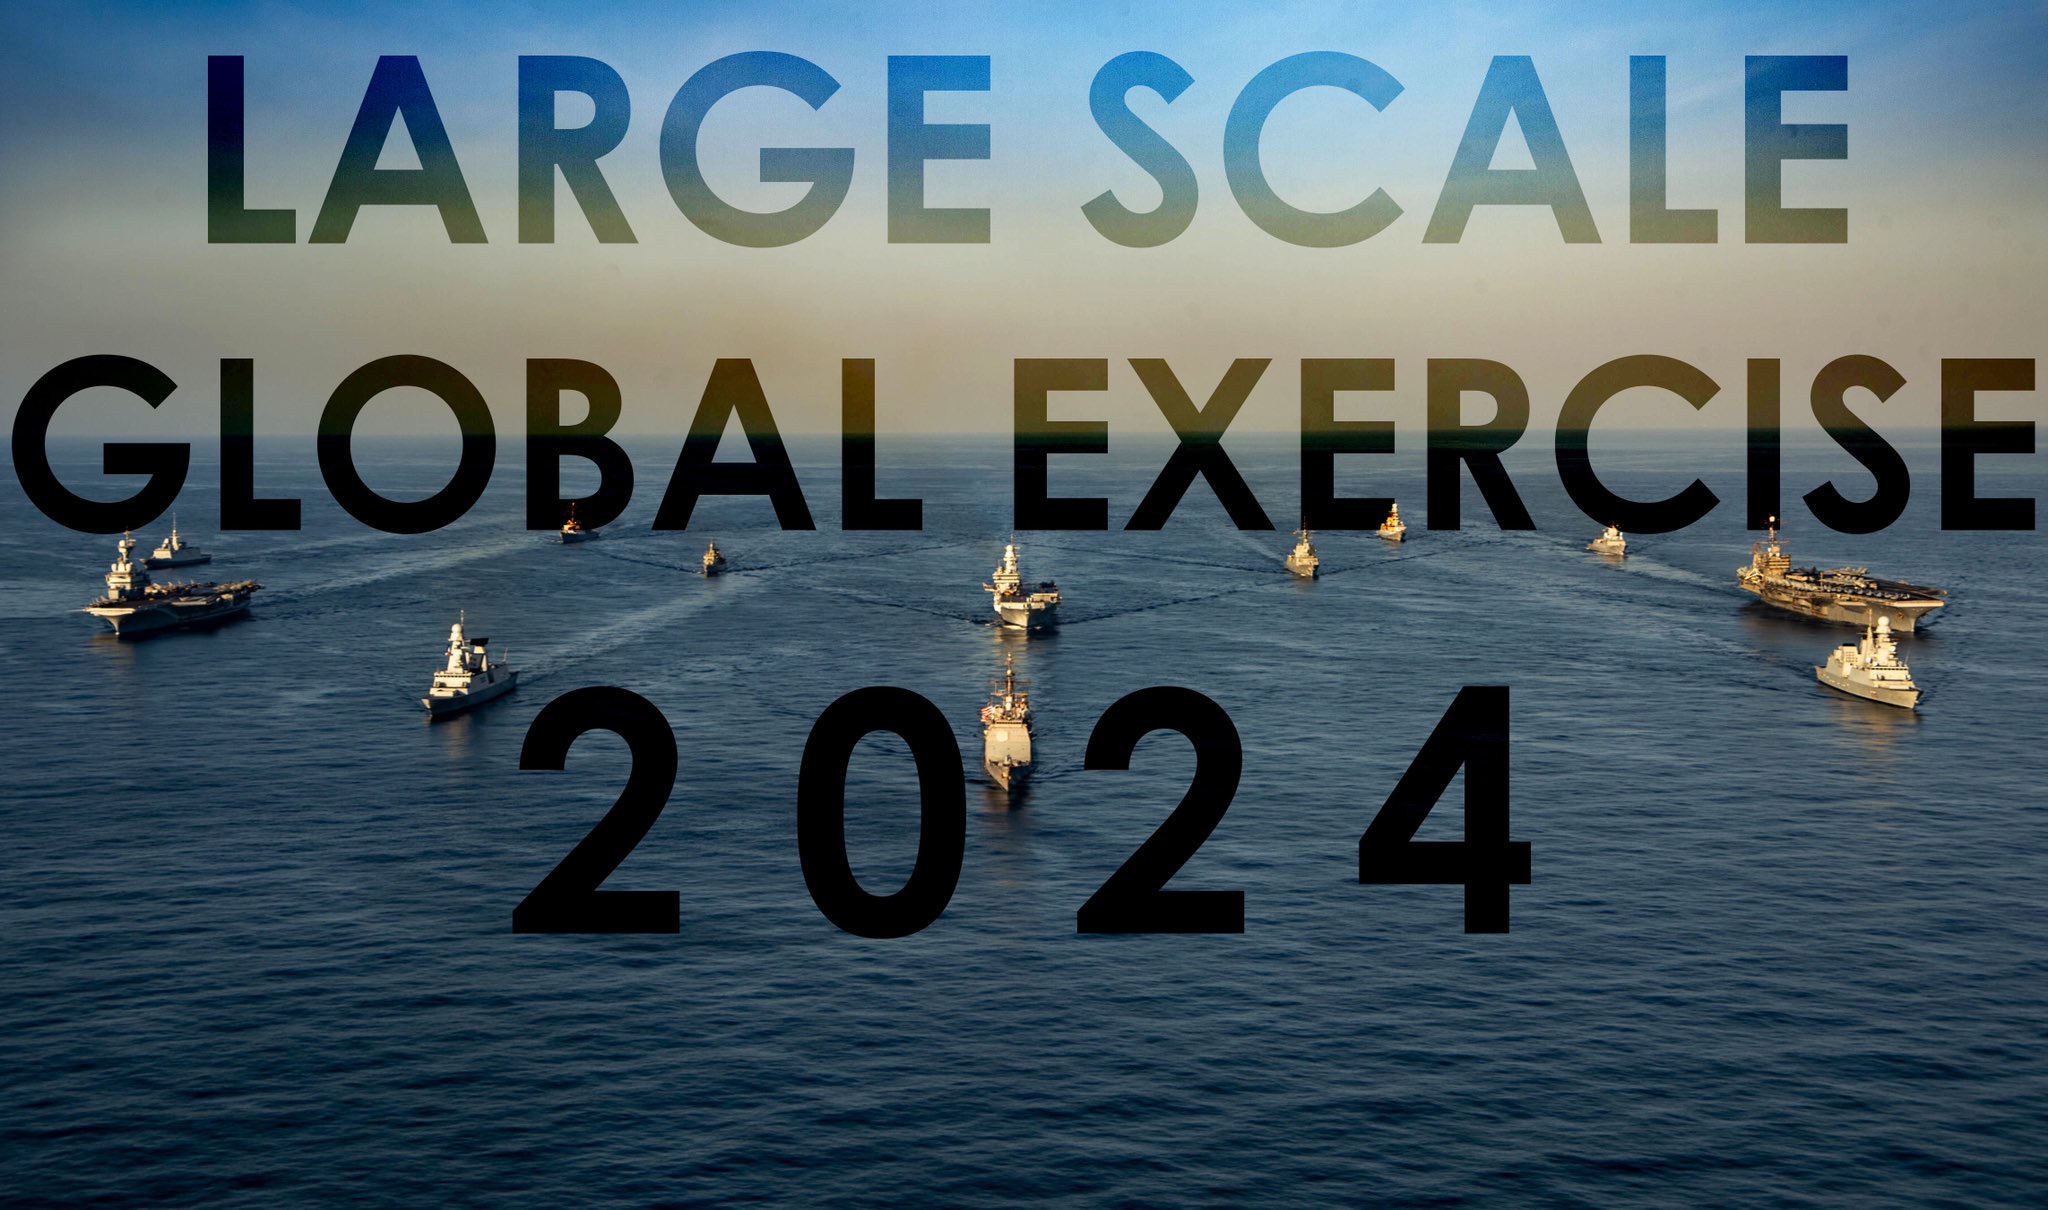 Large Scale Global Exercise 2024 to Start this Month Naval News